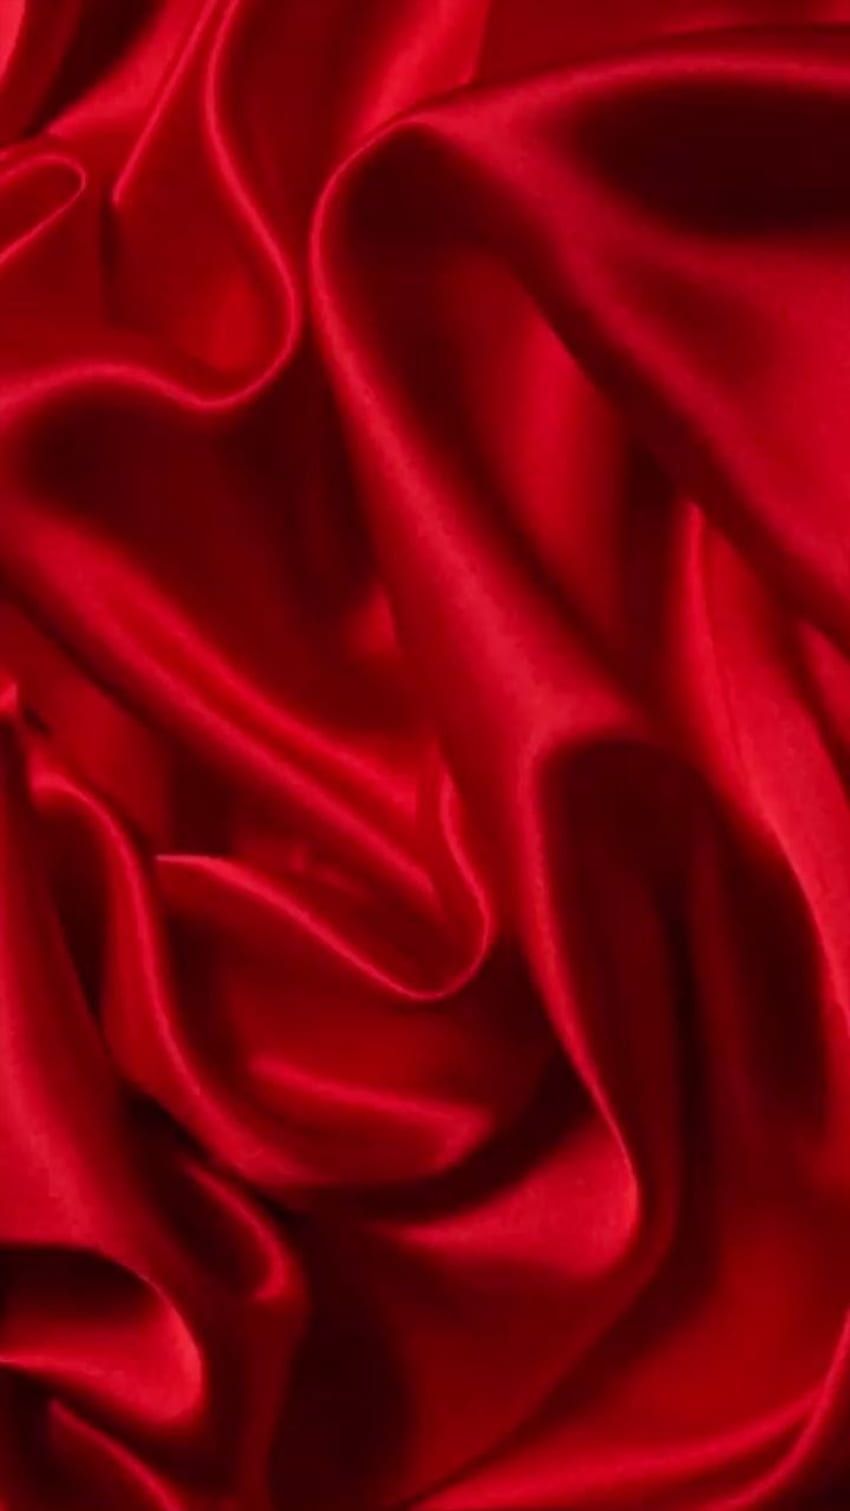 Red Satin iPhone Wallpaper with high-resolution 1080x1920 pixel. You can use this wallpaper for your iPhone 5, 6, 7, 8, X, XS, XR backgrounds, Mobile Screensaver, or iPad Lock Screen - Silk